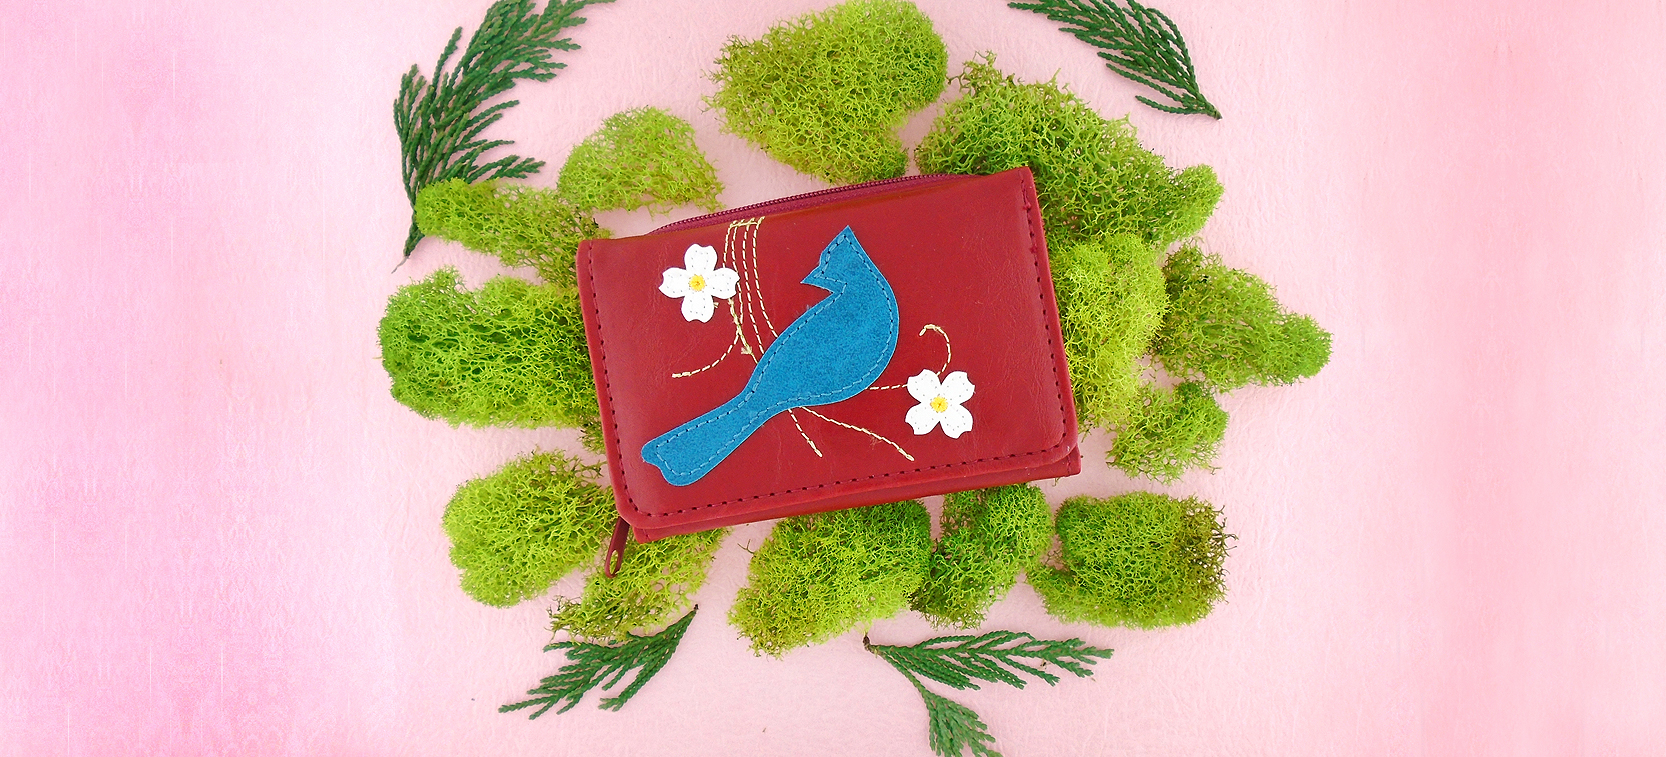 LAVISHY design and wholesale vegan applique small wallets to gift shops, boutiques and book stores in Canada, USA and worldwide.